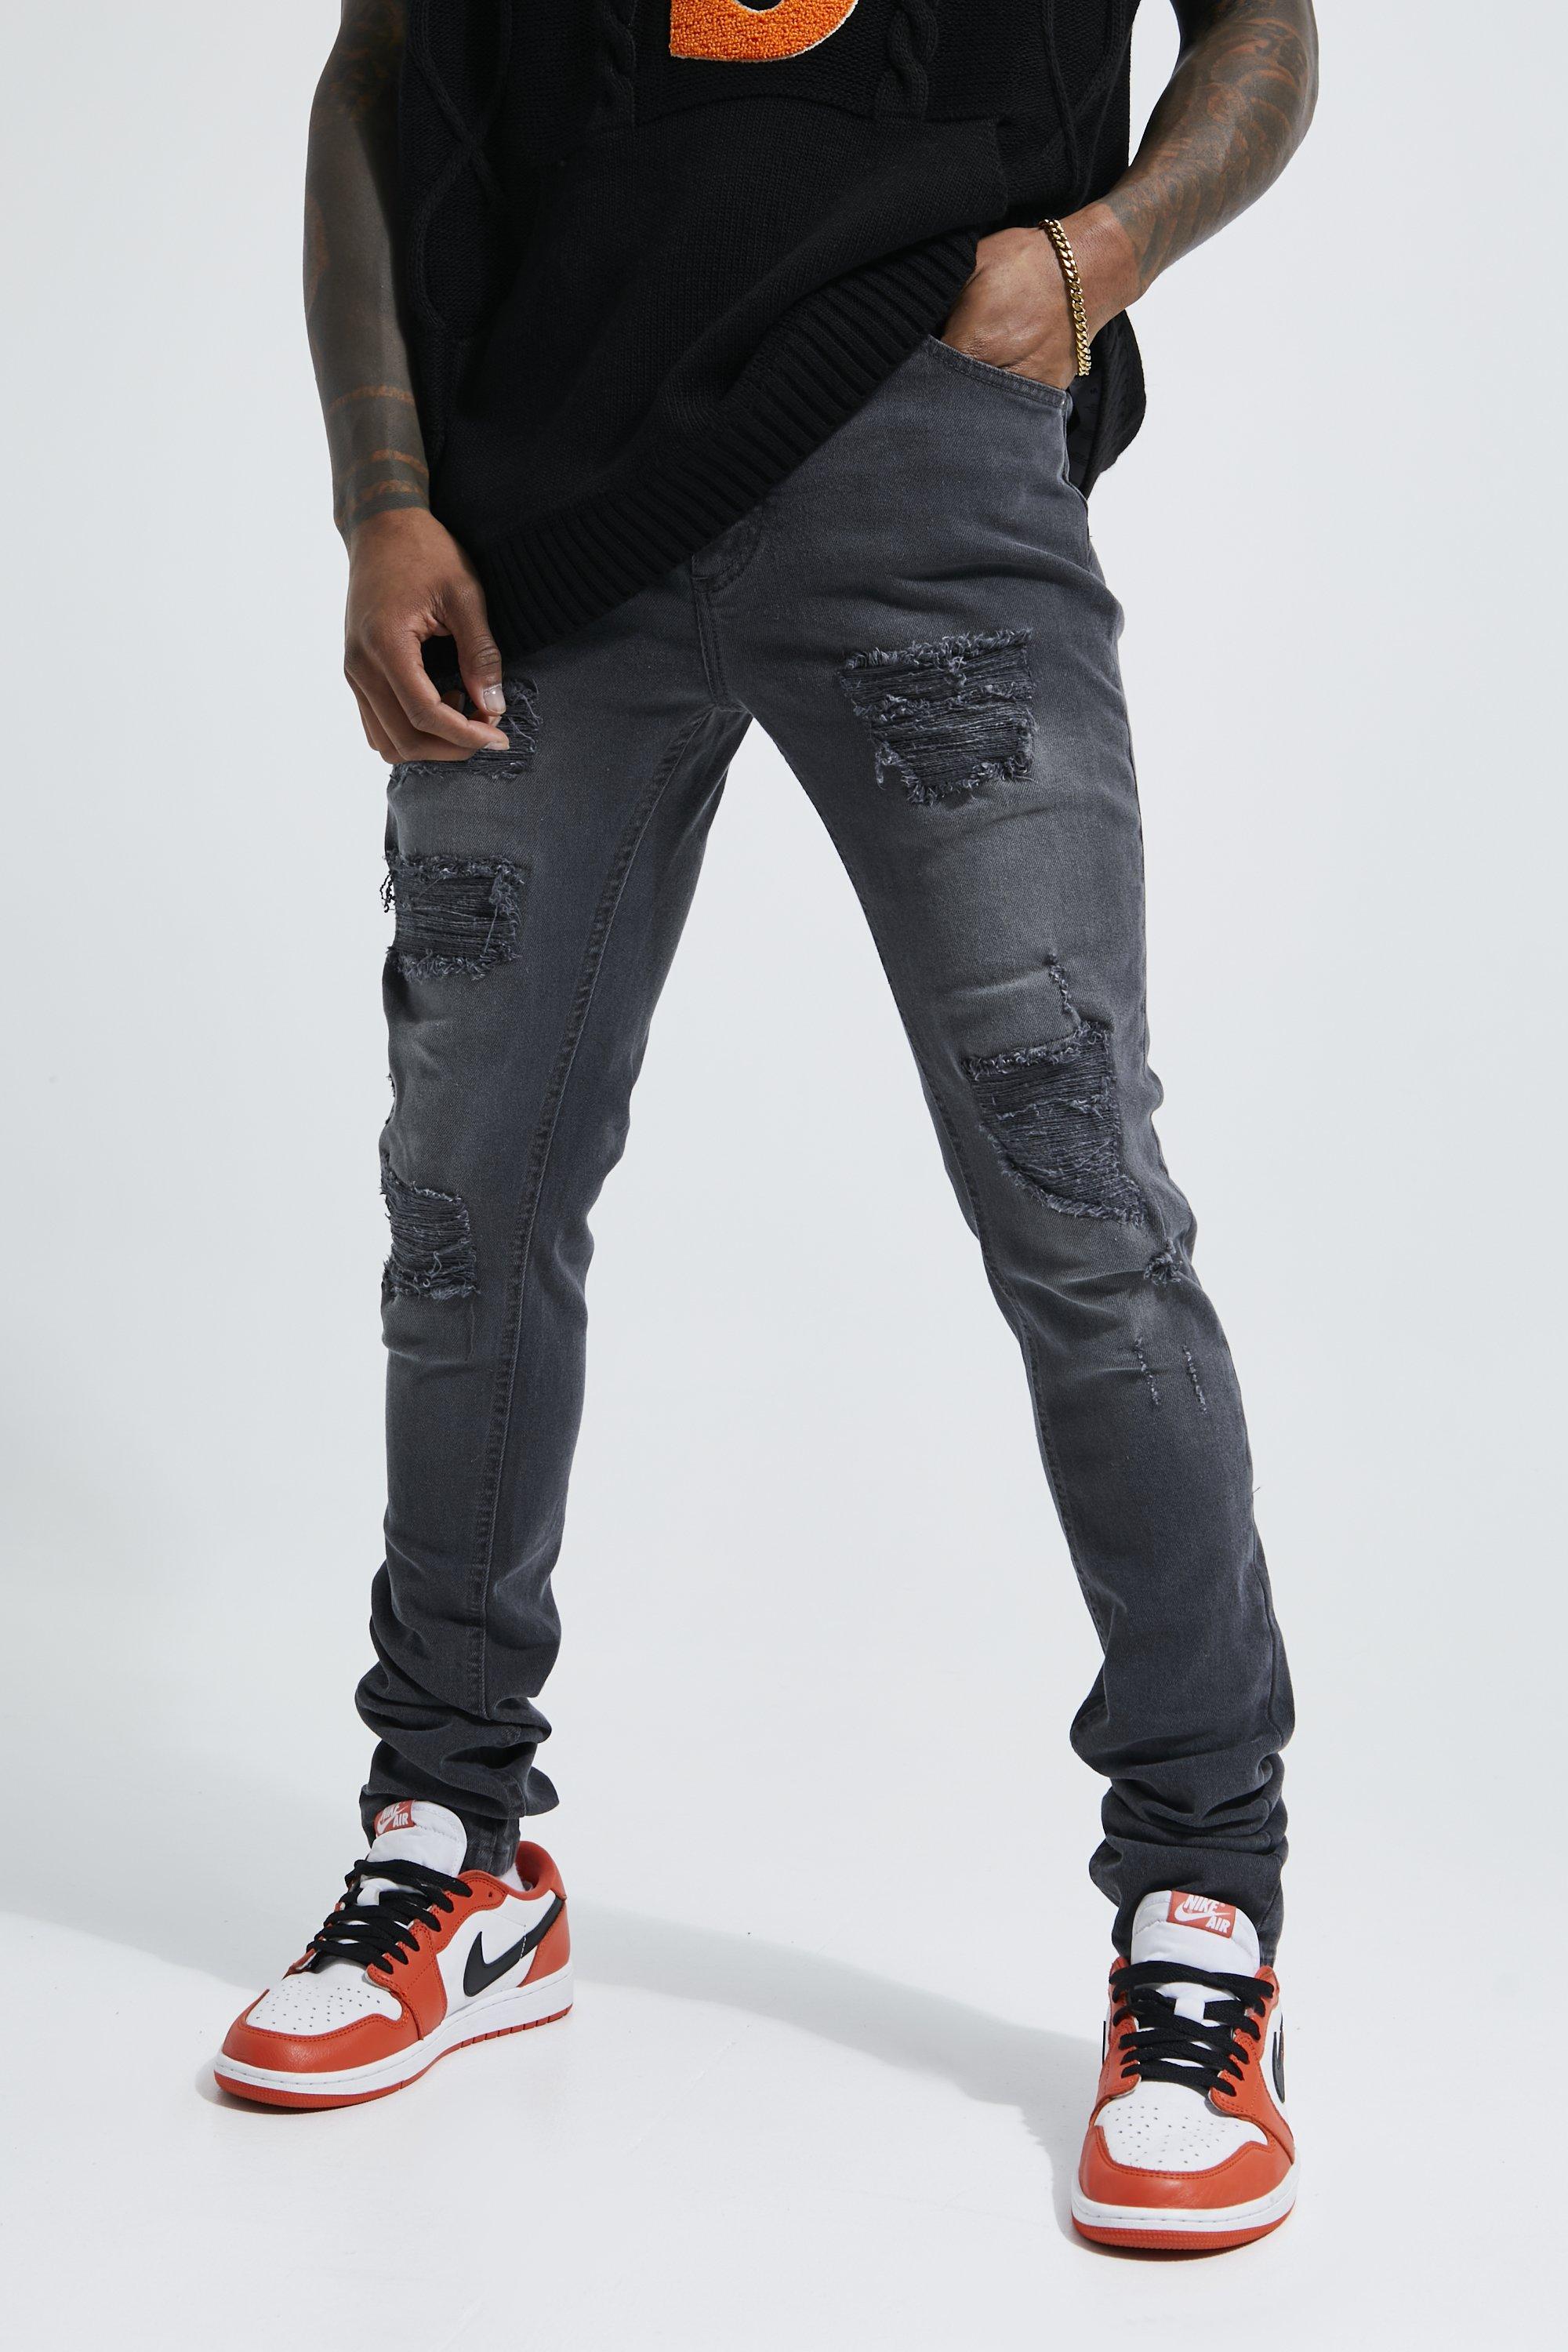 Men's Skinny Stretch & Stacked Jeans Boohoo UK